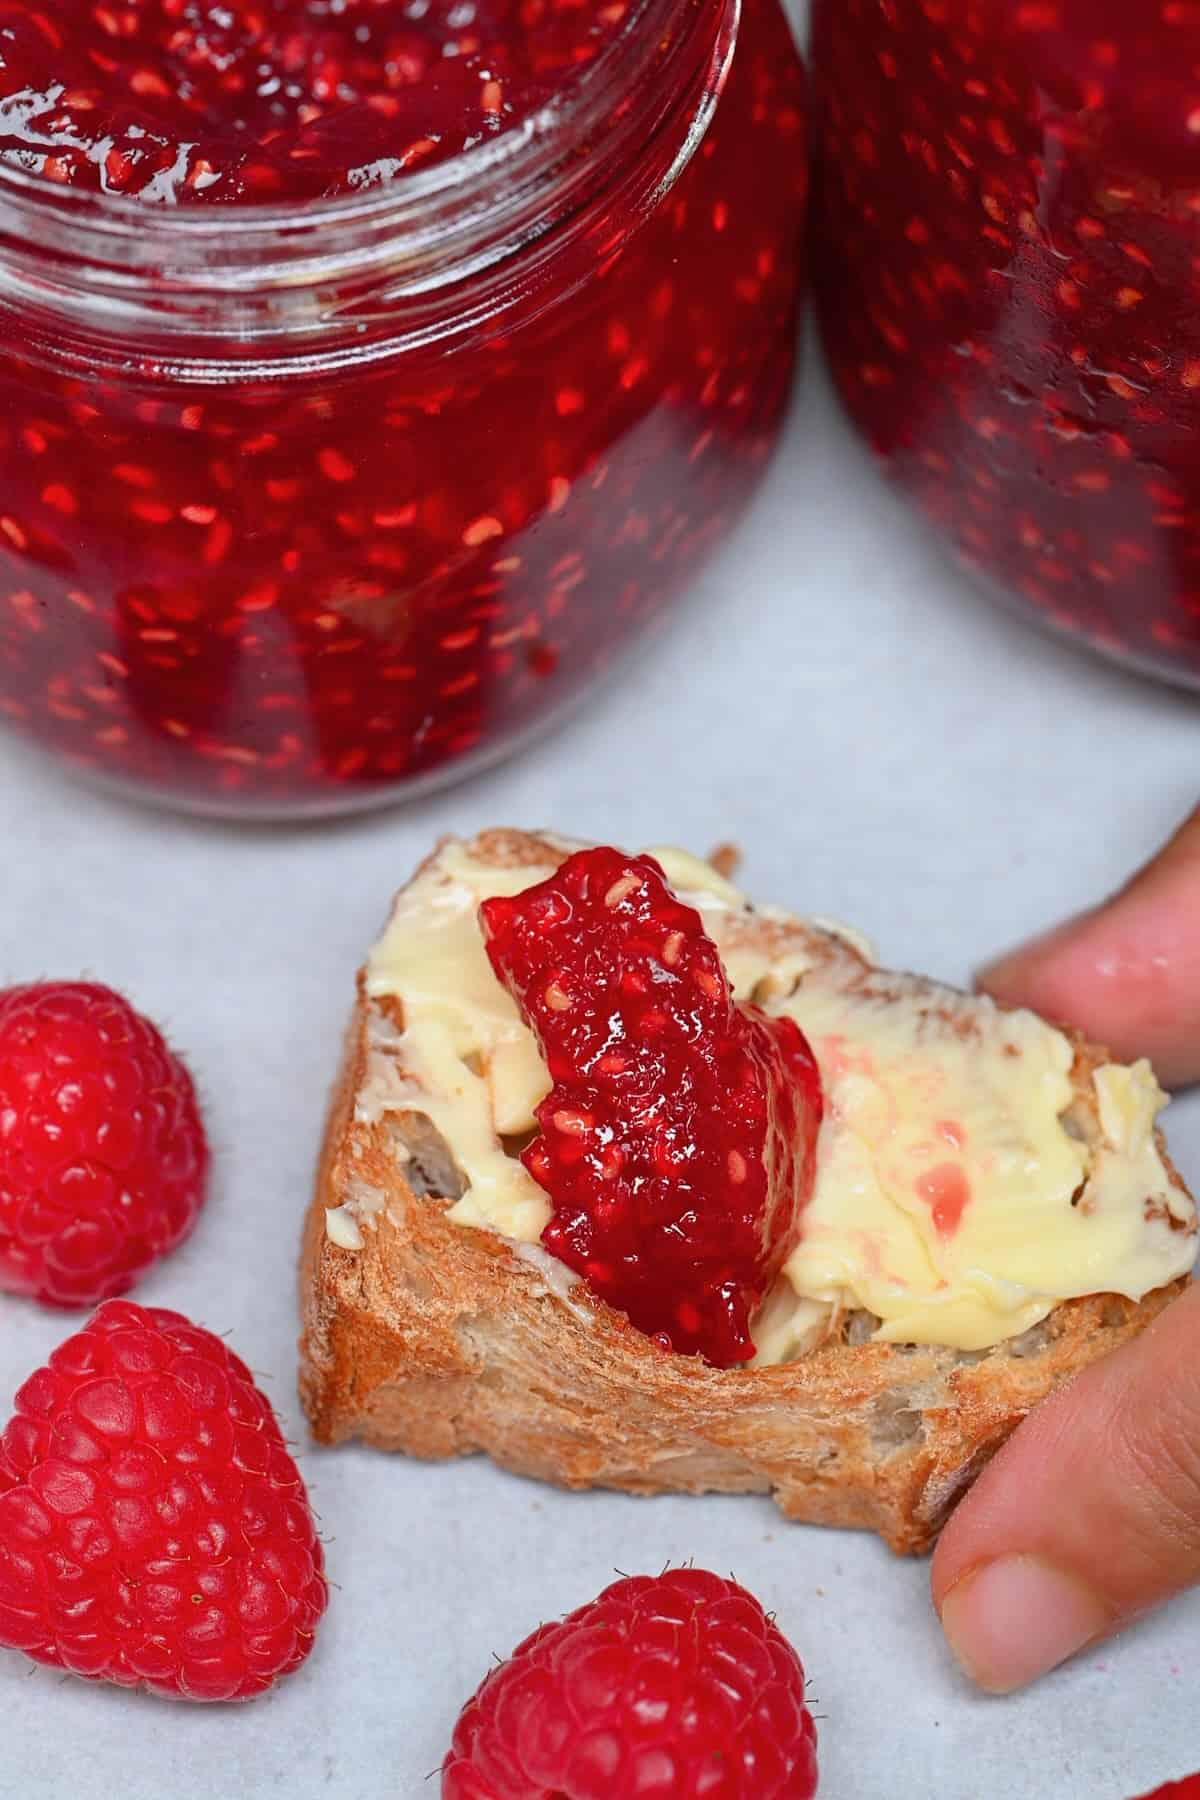 Raspberry jam and butter on bread